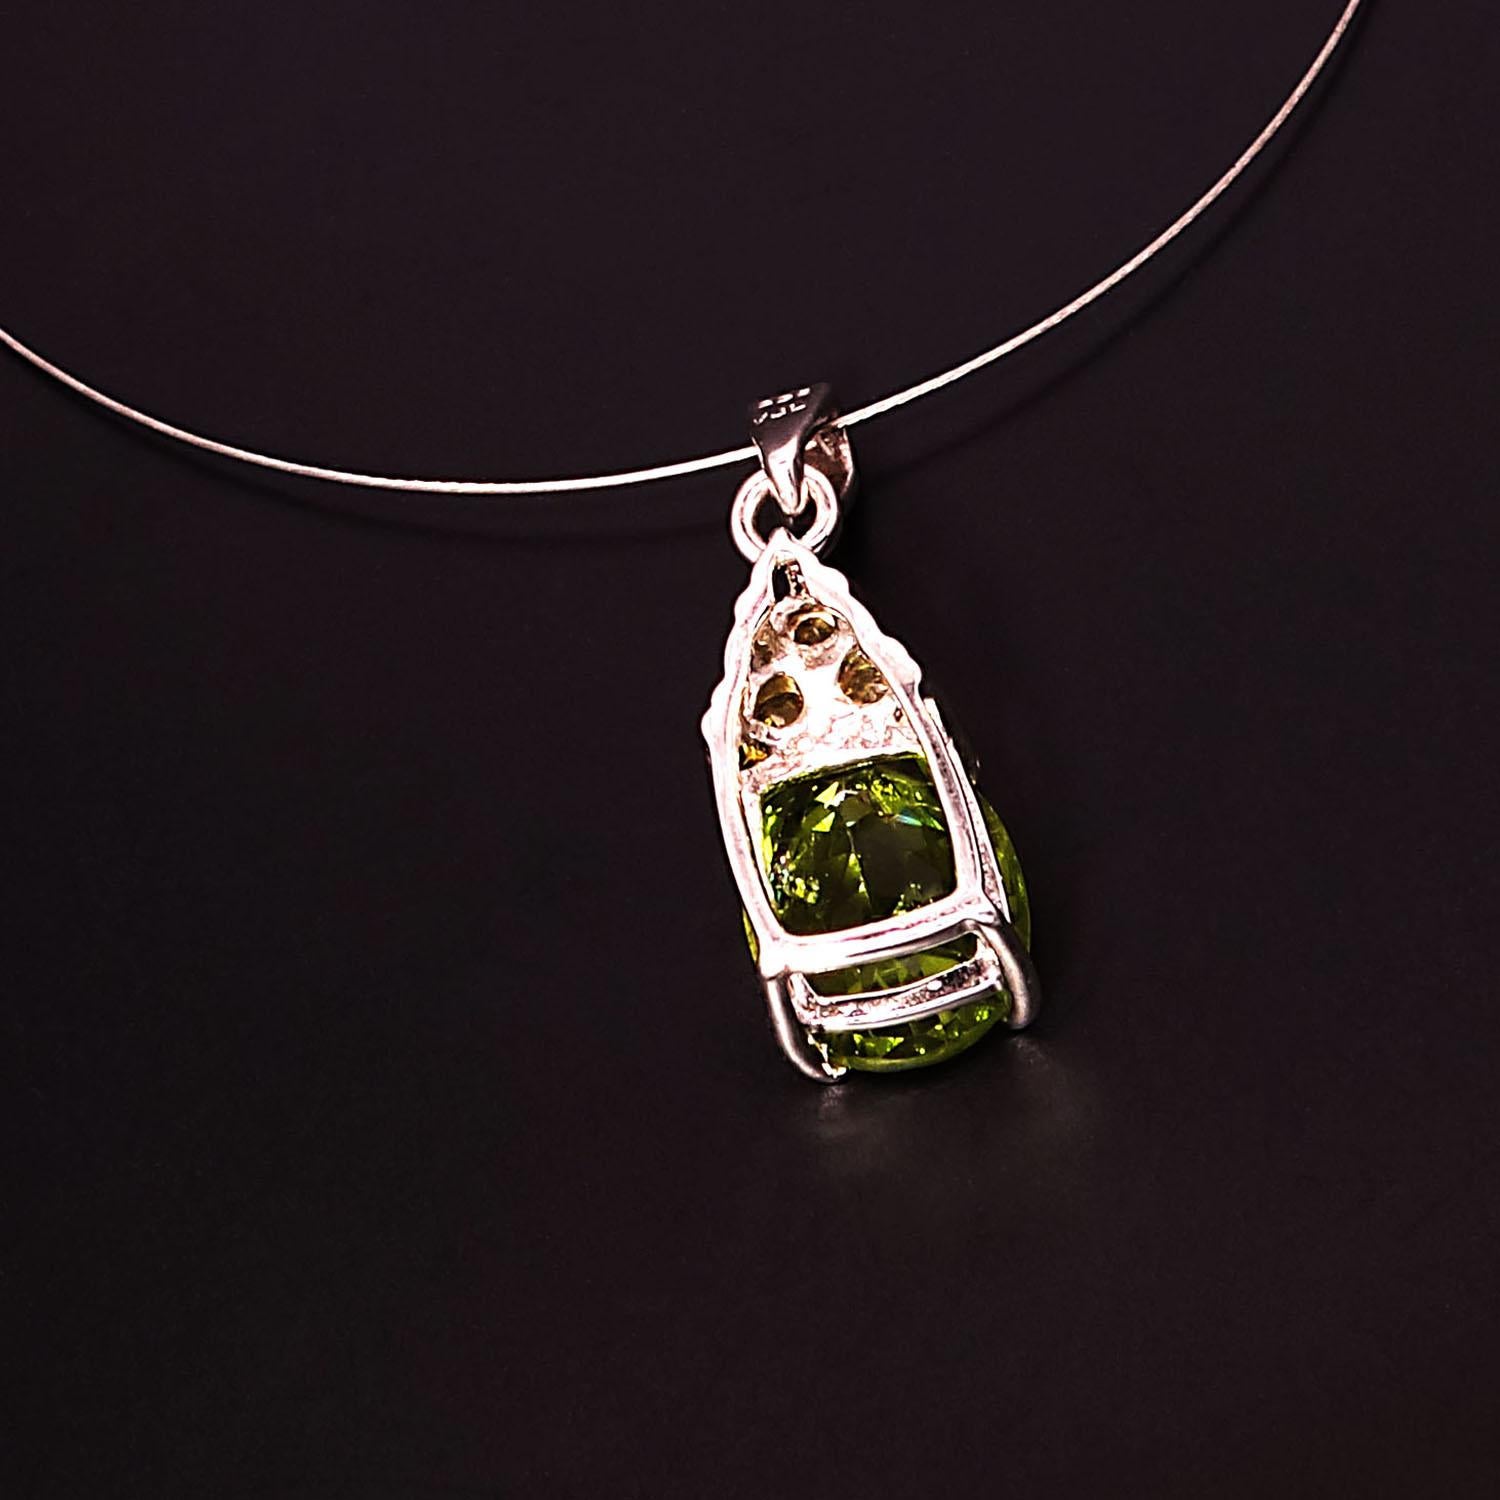 Gemjunky Glittering, Green Oval Peridot Pendant with Yellow Sapphire Accents  (Kunsthandwerker*in)